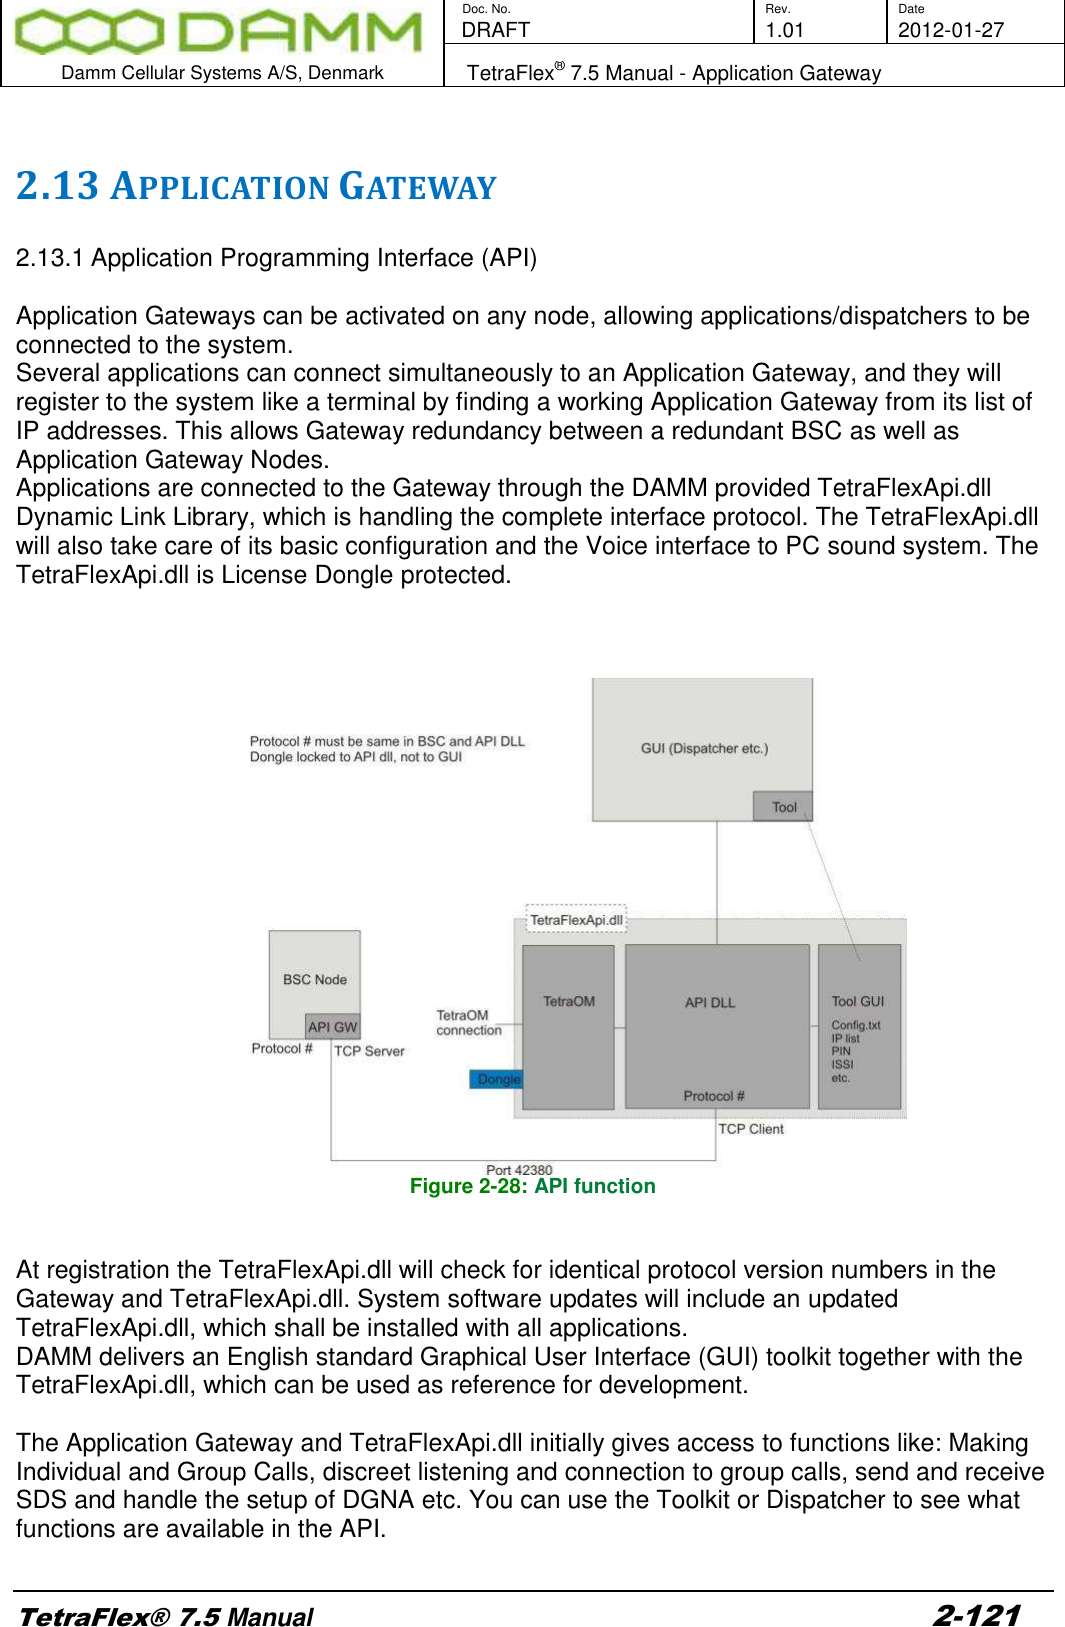        Doc. No. Rev. Date    DRAFT  1.01 2012-01-27  Damm Cellular Systems A/S, Denmark   TetraFlex® 7.5 Manual - Application Gateway  TetraFlex® 7.5 Manual 2-121  2.13 APPLICATION GATEWAY  2.13.1 Application Programming Interface (API)  Application Gateways can be activated on any node, allowing applications/dispatchers to be connected to the system.  Several applications can connect simultaneously to an Application Gateway, and they will register to the system like a terminal by finding a working Application Gateway from its list of IP addresses. This allows Gateway redundancy between a redundant BSC as well as Application Gateway Nodes.  Applications are connected to the Gateway through the DAMM provided TetraFlexApi.dll Dynamic Link Library, which is handling the complete interface protocol. The TetraFlexApi.dll will also take care of its basic configuration and the Voice interface to PC sound system. The TetraFlexApi.dll is License Dongle protected.    Figure 2-28: API function   At registration the TetraFlexApi.dll will check for identical protocol version numbers in the Gateway and TetraFlexApi.dll. System software updates will include an updated TetraFlexApi.dll, which shall be installed with all applications. DAMM delivers an English standard Graphical User Interface (GUI) toolkit together with the TetraFlexApi.dll, which can be used as reference for development.  The Application Gateway and TetraFlexApi.dll initially gives access to functions like: Making Individual and Group Calls, discreet listening and connection to group calls, send and receive SDS and handle the setup of DGNA etc. You can use the Toolkit or Dispatcher to see what functions are available in the API.  